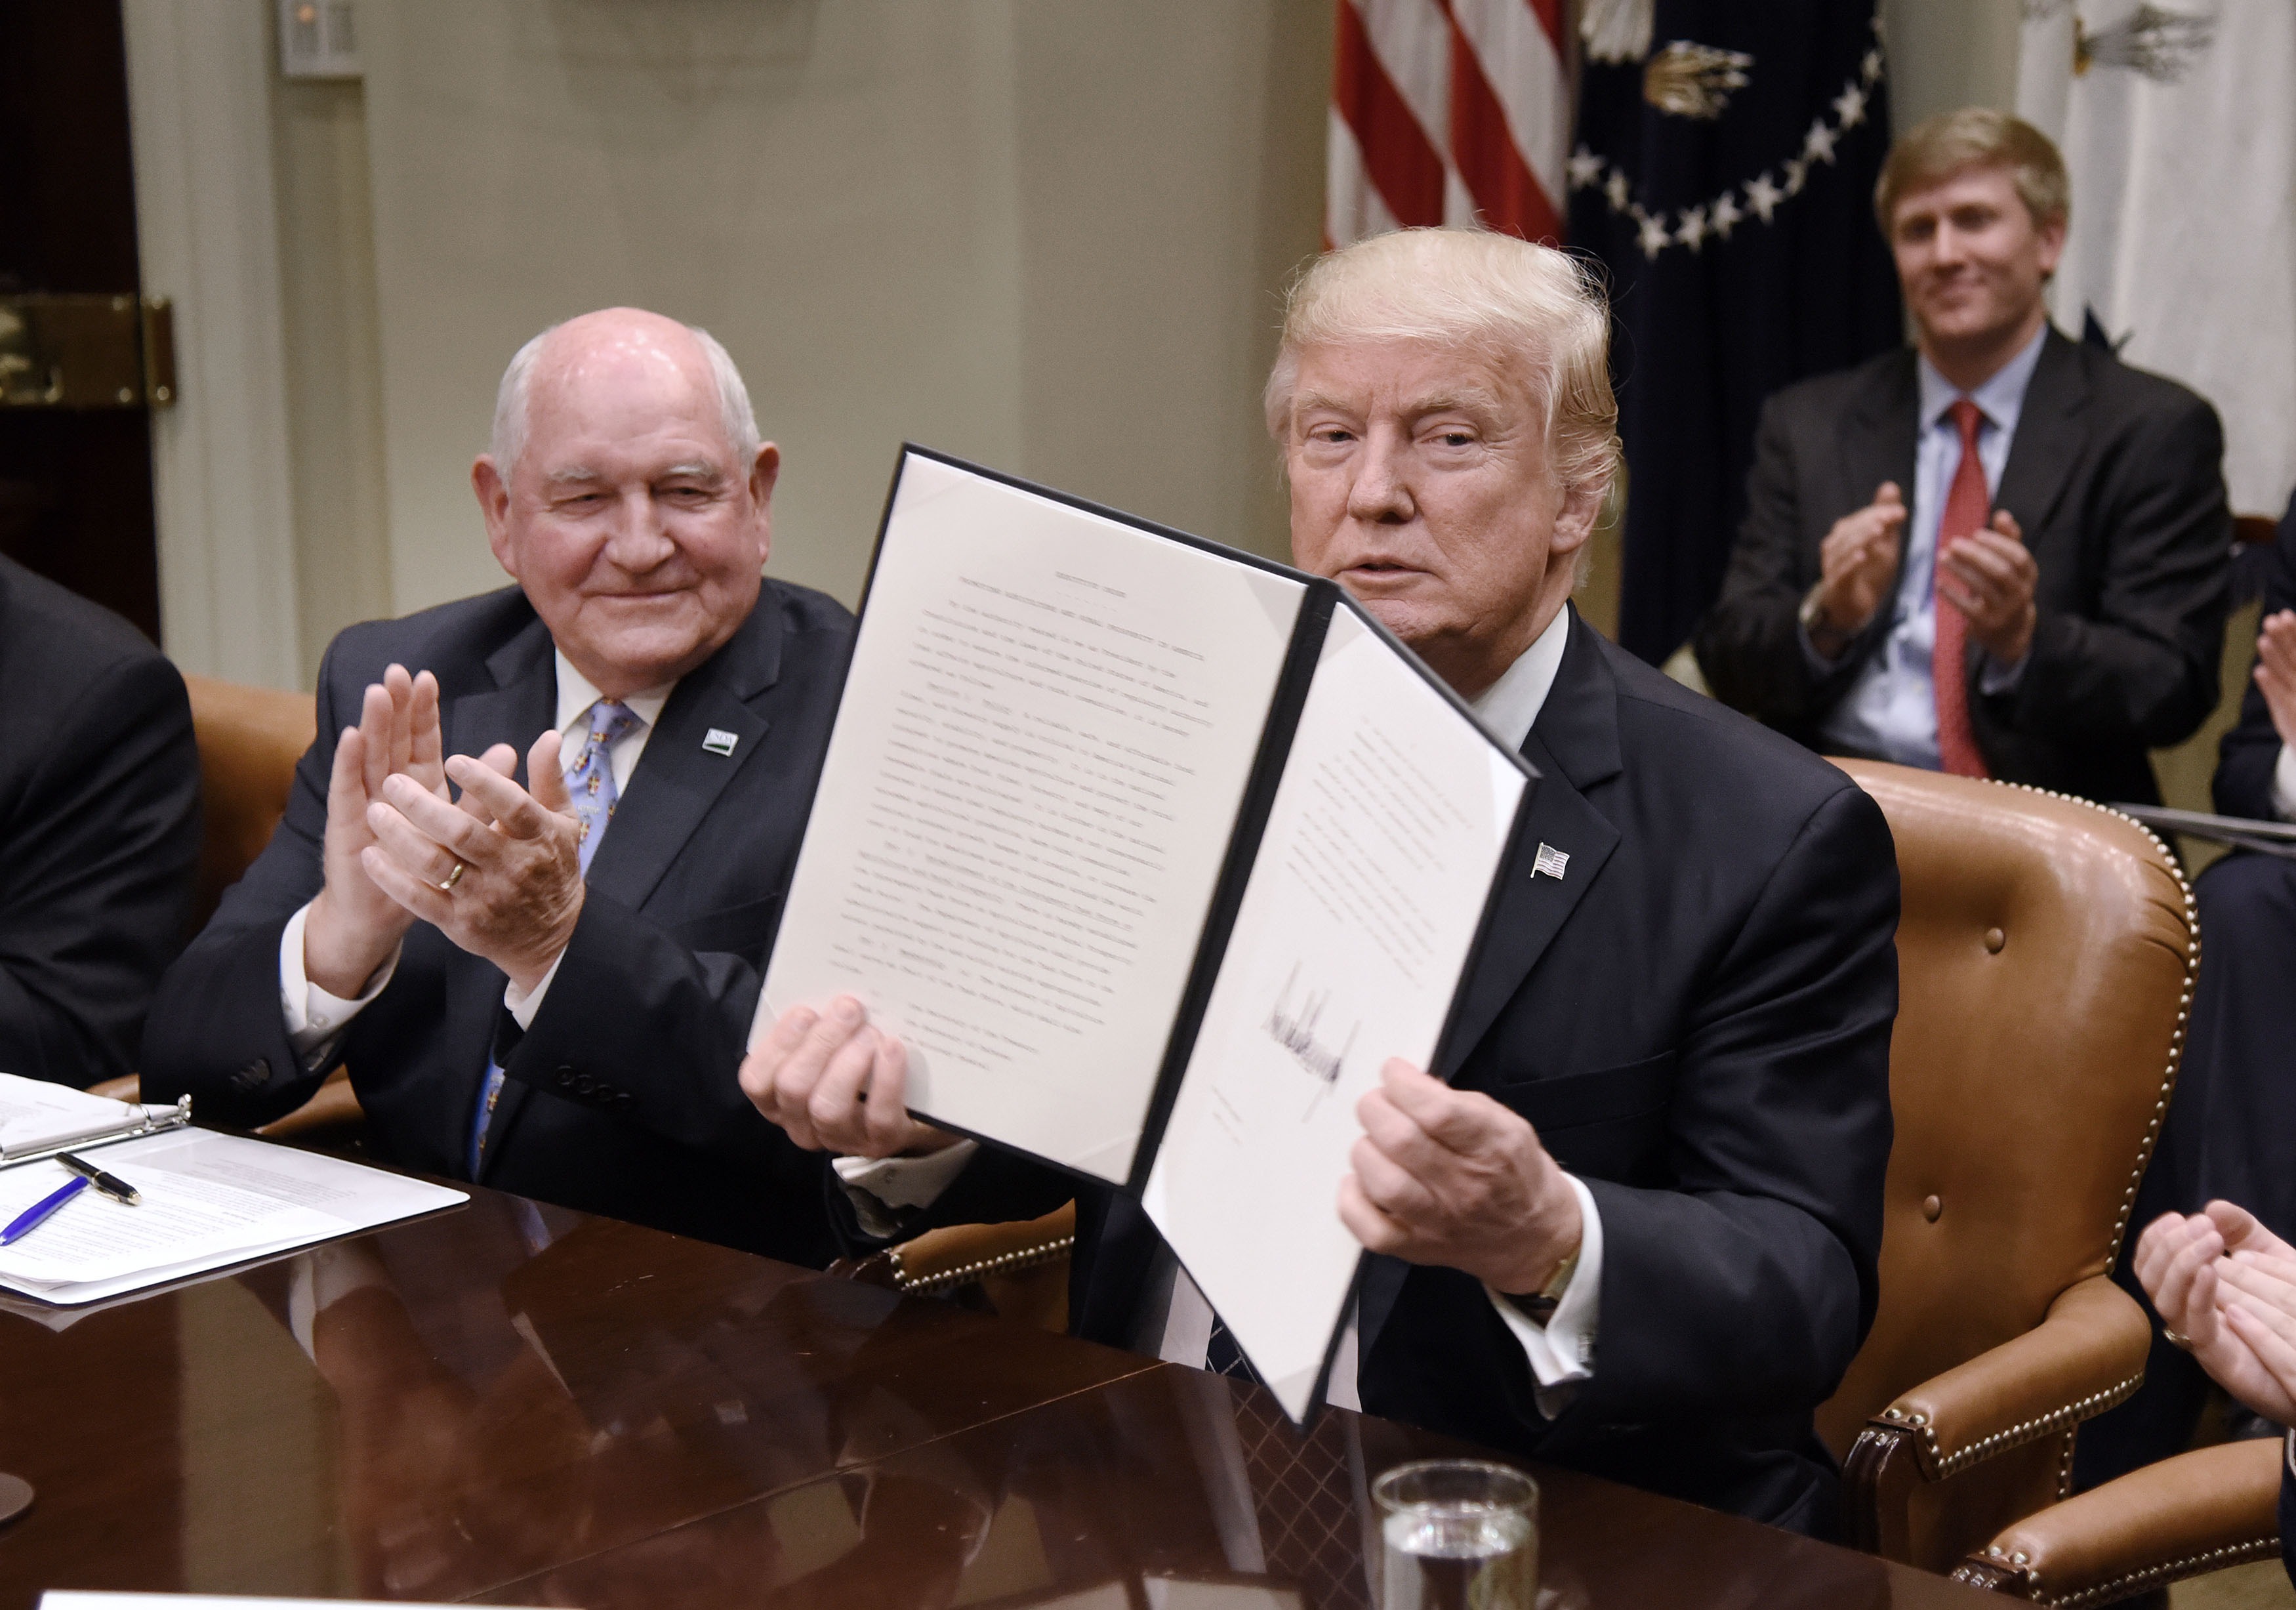 President Donald Trump signs the Executive Order Promoting Agriculture and Rural Prosperity in America as Agriculture Secretary Sonny Perdue looks on during a roundtable with farmers in the Roosevelt Room of the White House on April 25, 2017 in Washington, DC. (Photograph by Olivier Douliery—Getty/Pool)